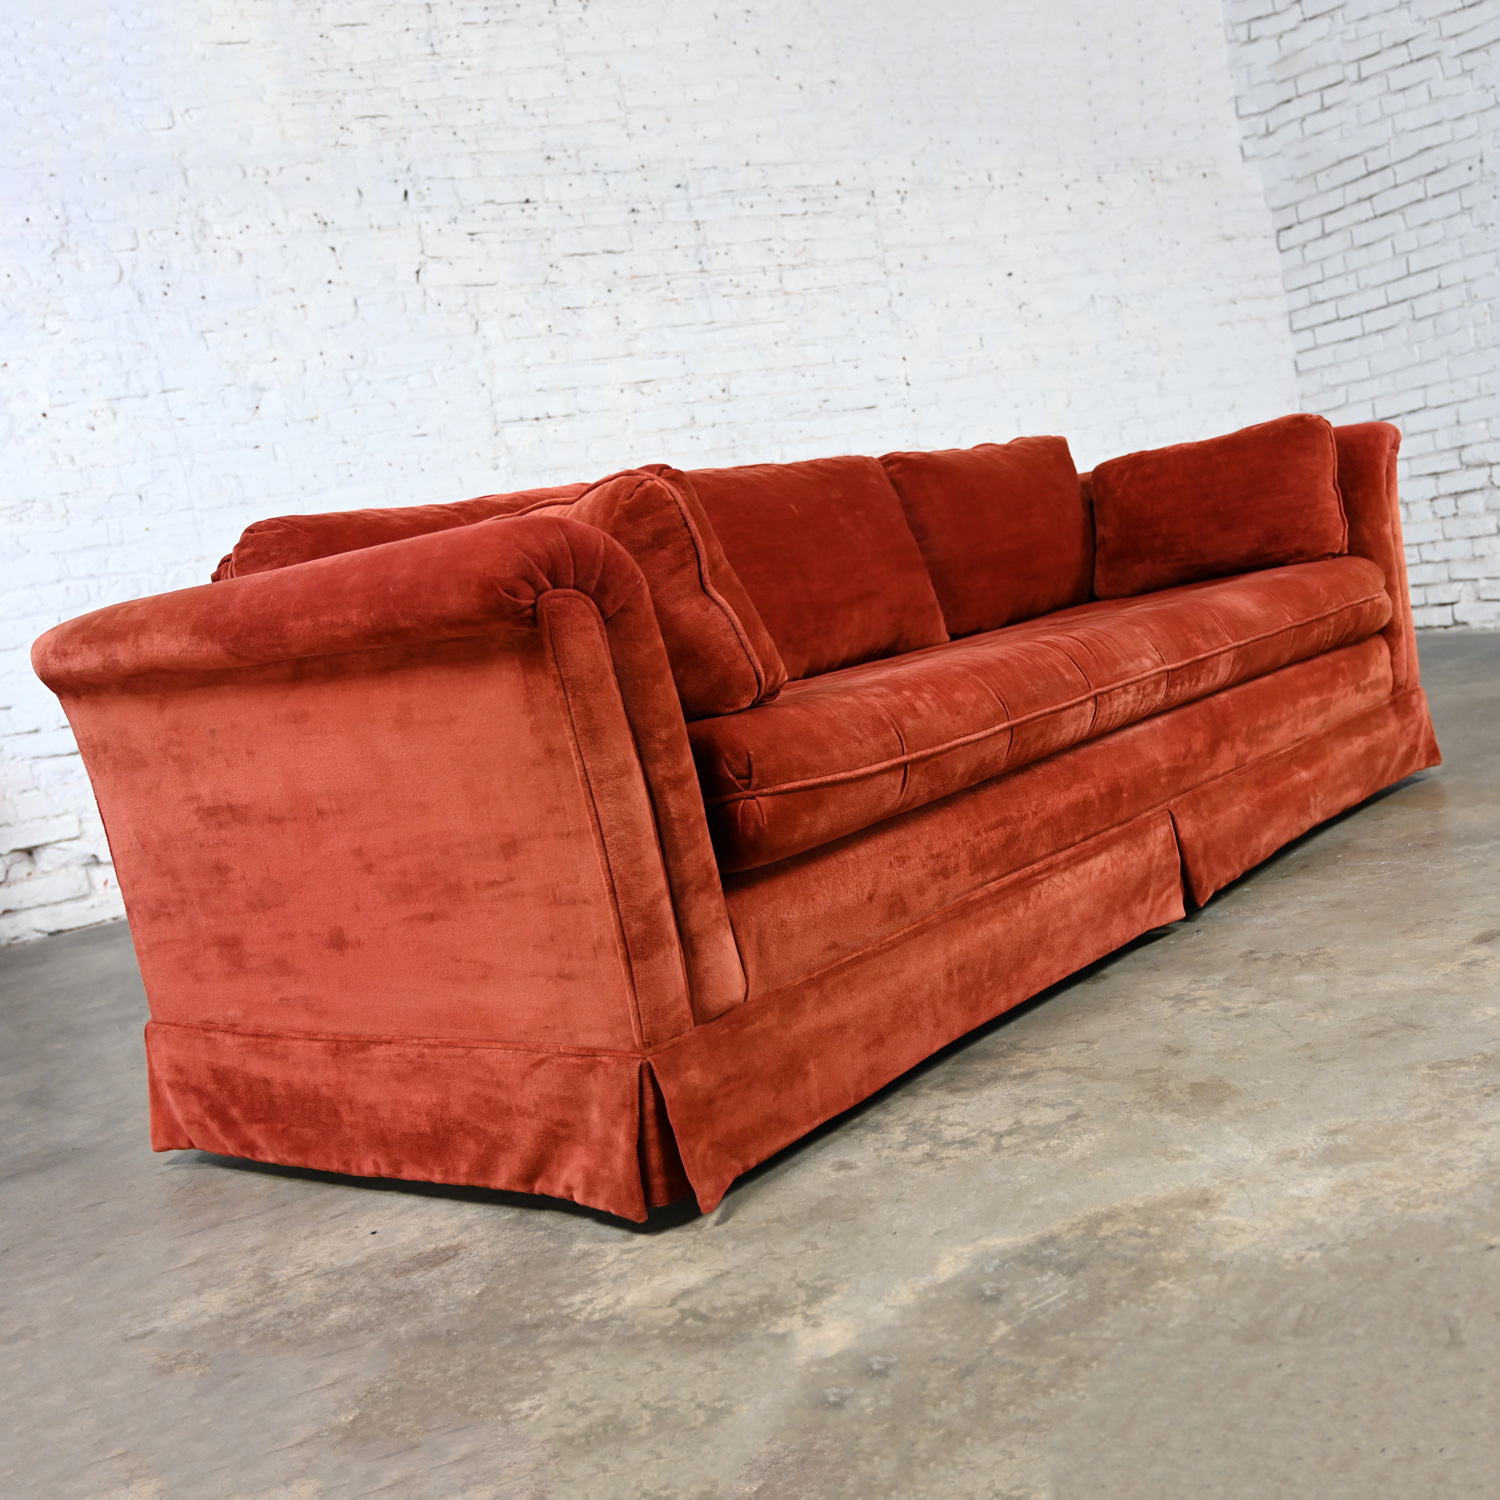 1970’s Modern Orange Chenille Tuxedo Sofa with Rolled Arms by Stratford Designs Division of Futorian Manufacturing Company